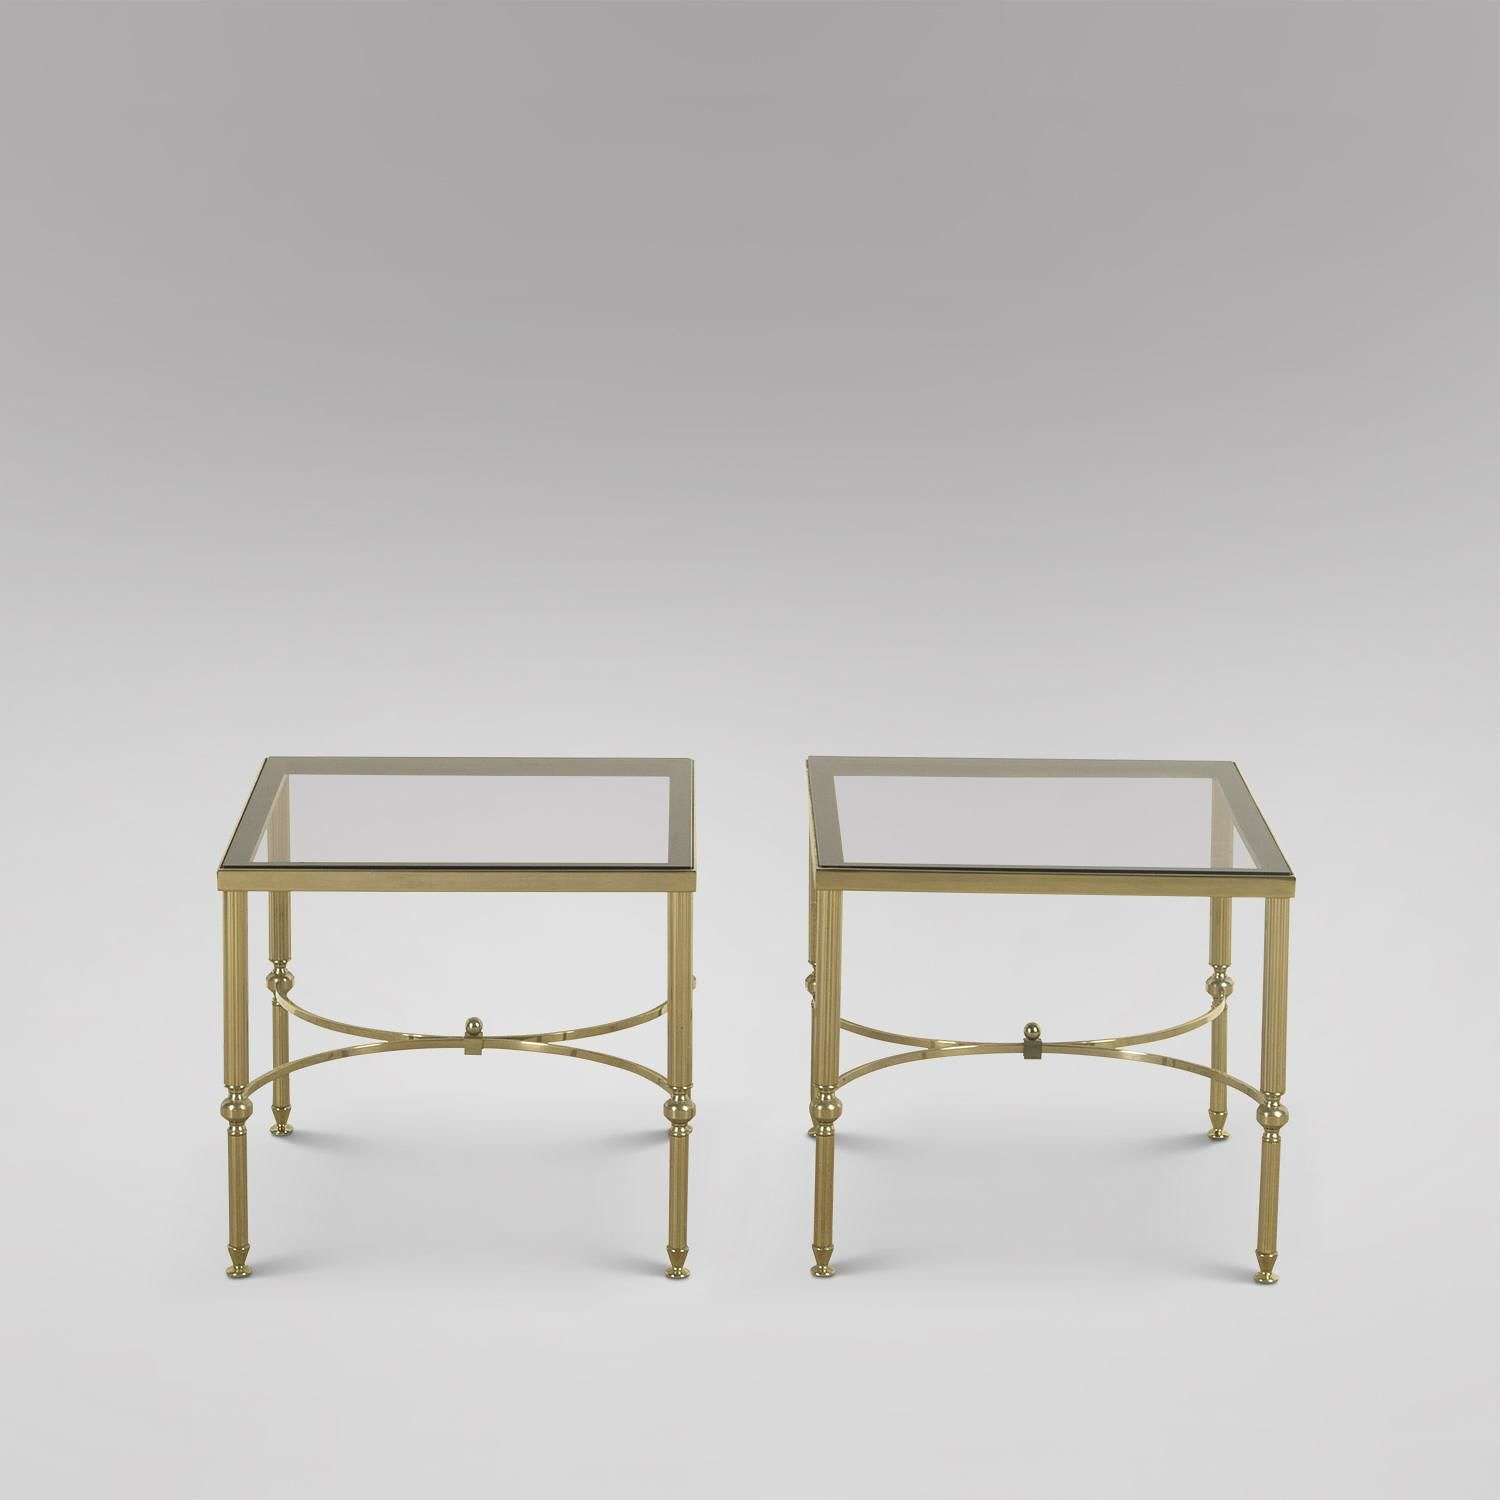 Pair of Lacquered Brass and Smoked Glass Tables